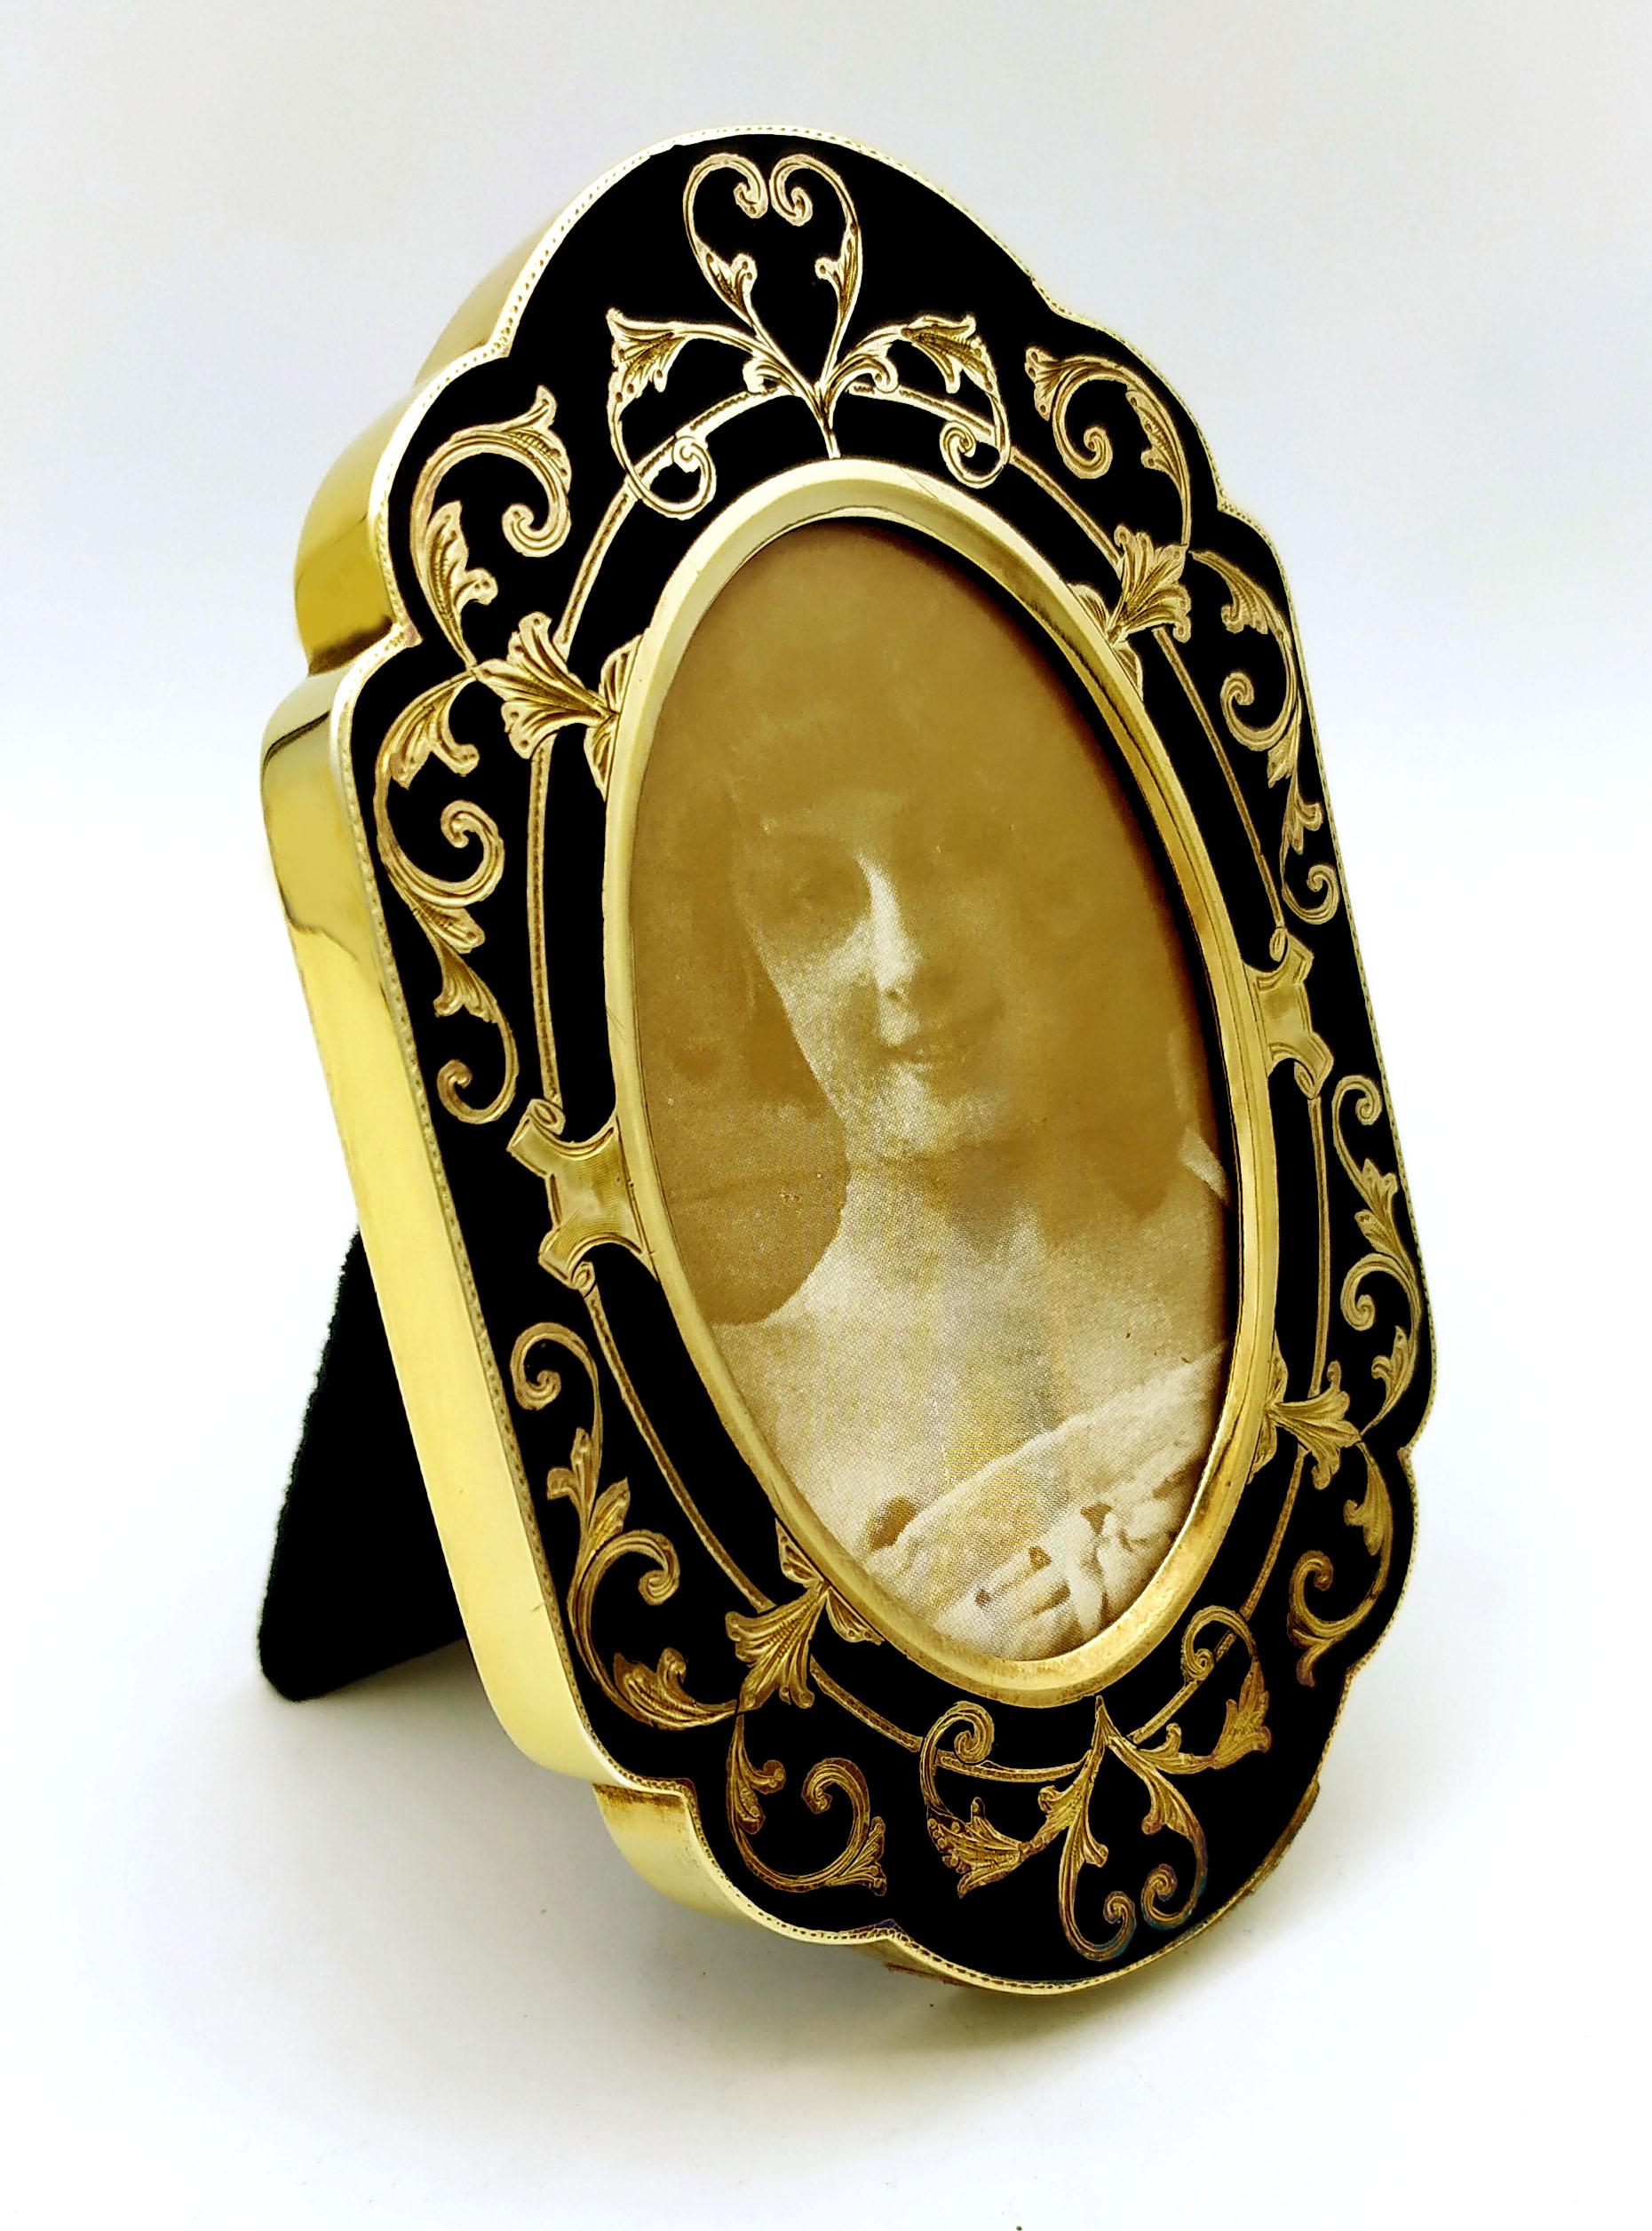 Oval photograph frame, shaped edge in sterling silver 925/1000 gold plated with fine hand engraving, interspersed with black fired enamel in Baroque style. External cm. 7.4 x 11.3. Weight gr. 86. Designed by Franco Salimbeni in 1982 on inspiration